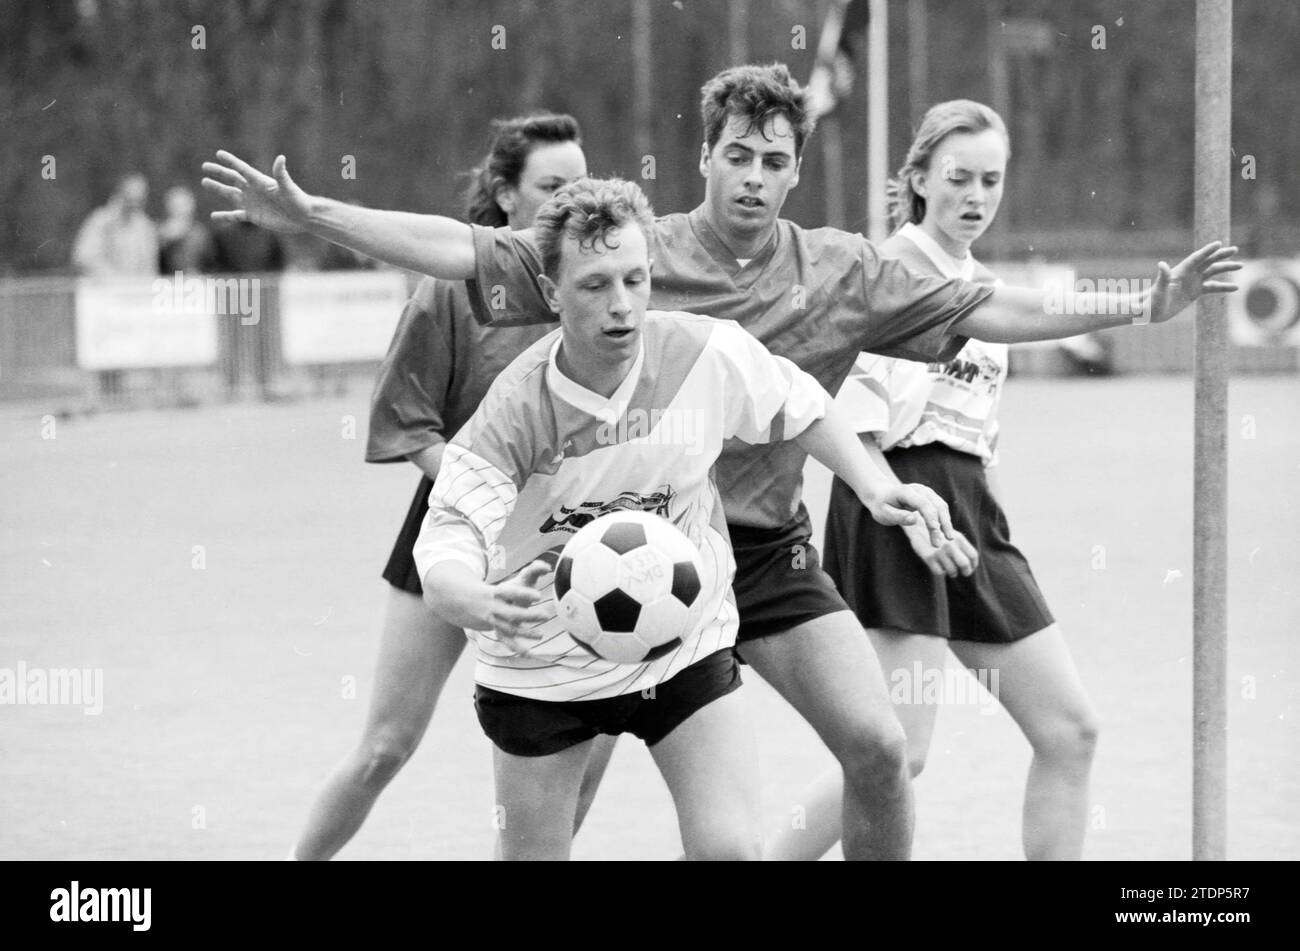 Korfball: D.K.V. -Fides P, 08-04-1994, Whizgle News from the Past, Tailored for the Future. Explore historical narratives, Dutch The Netherlands agency image with a modern perspective, bridging the gap between yesterday's events and tomorrow's insights. A timeless journey shaping the stories that shape our future Stock Photo